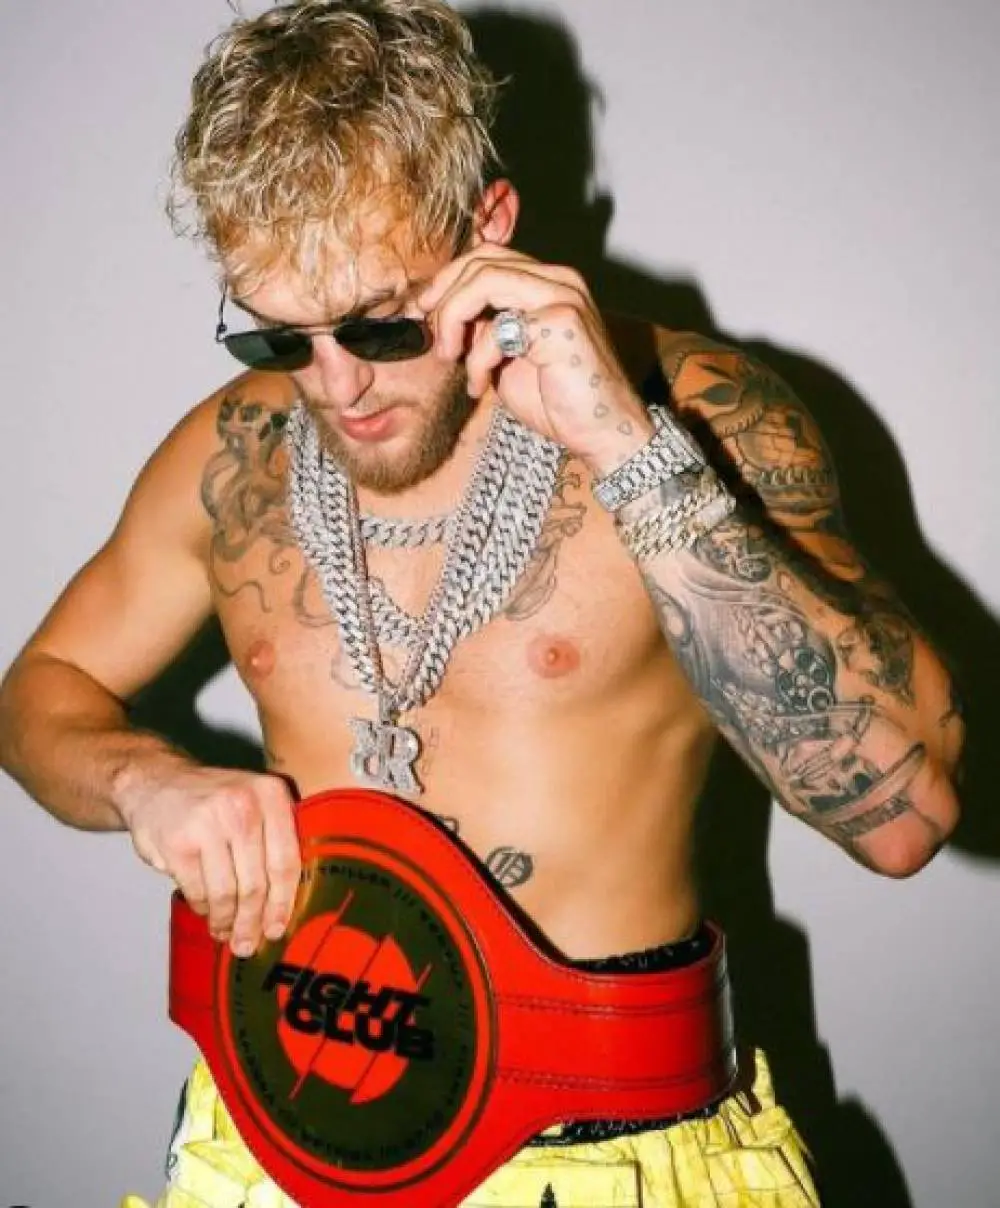 Who Is YouTuber-Turned-Boxer, Jake Paul?